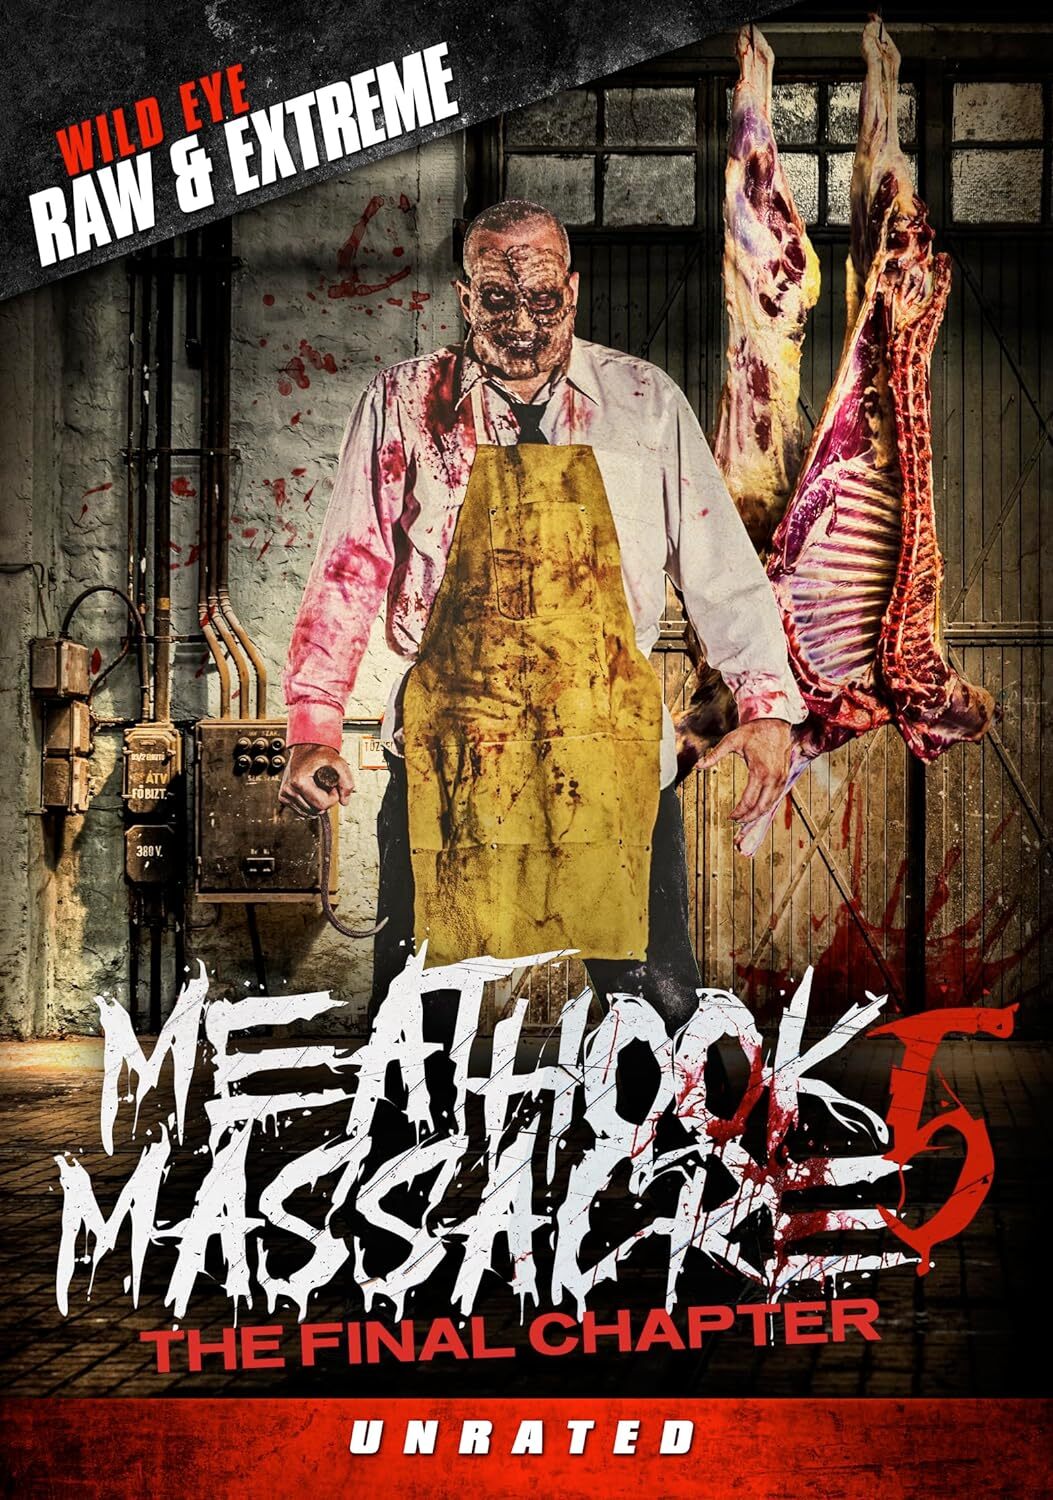 Meathook Massacre: The Final Chapter DVD (Unrated) (Canada)